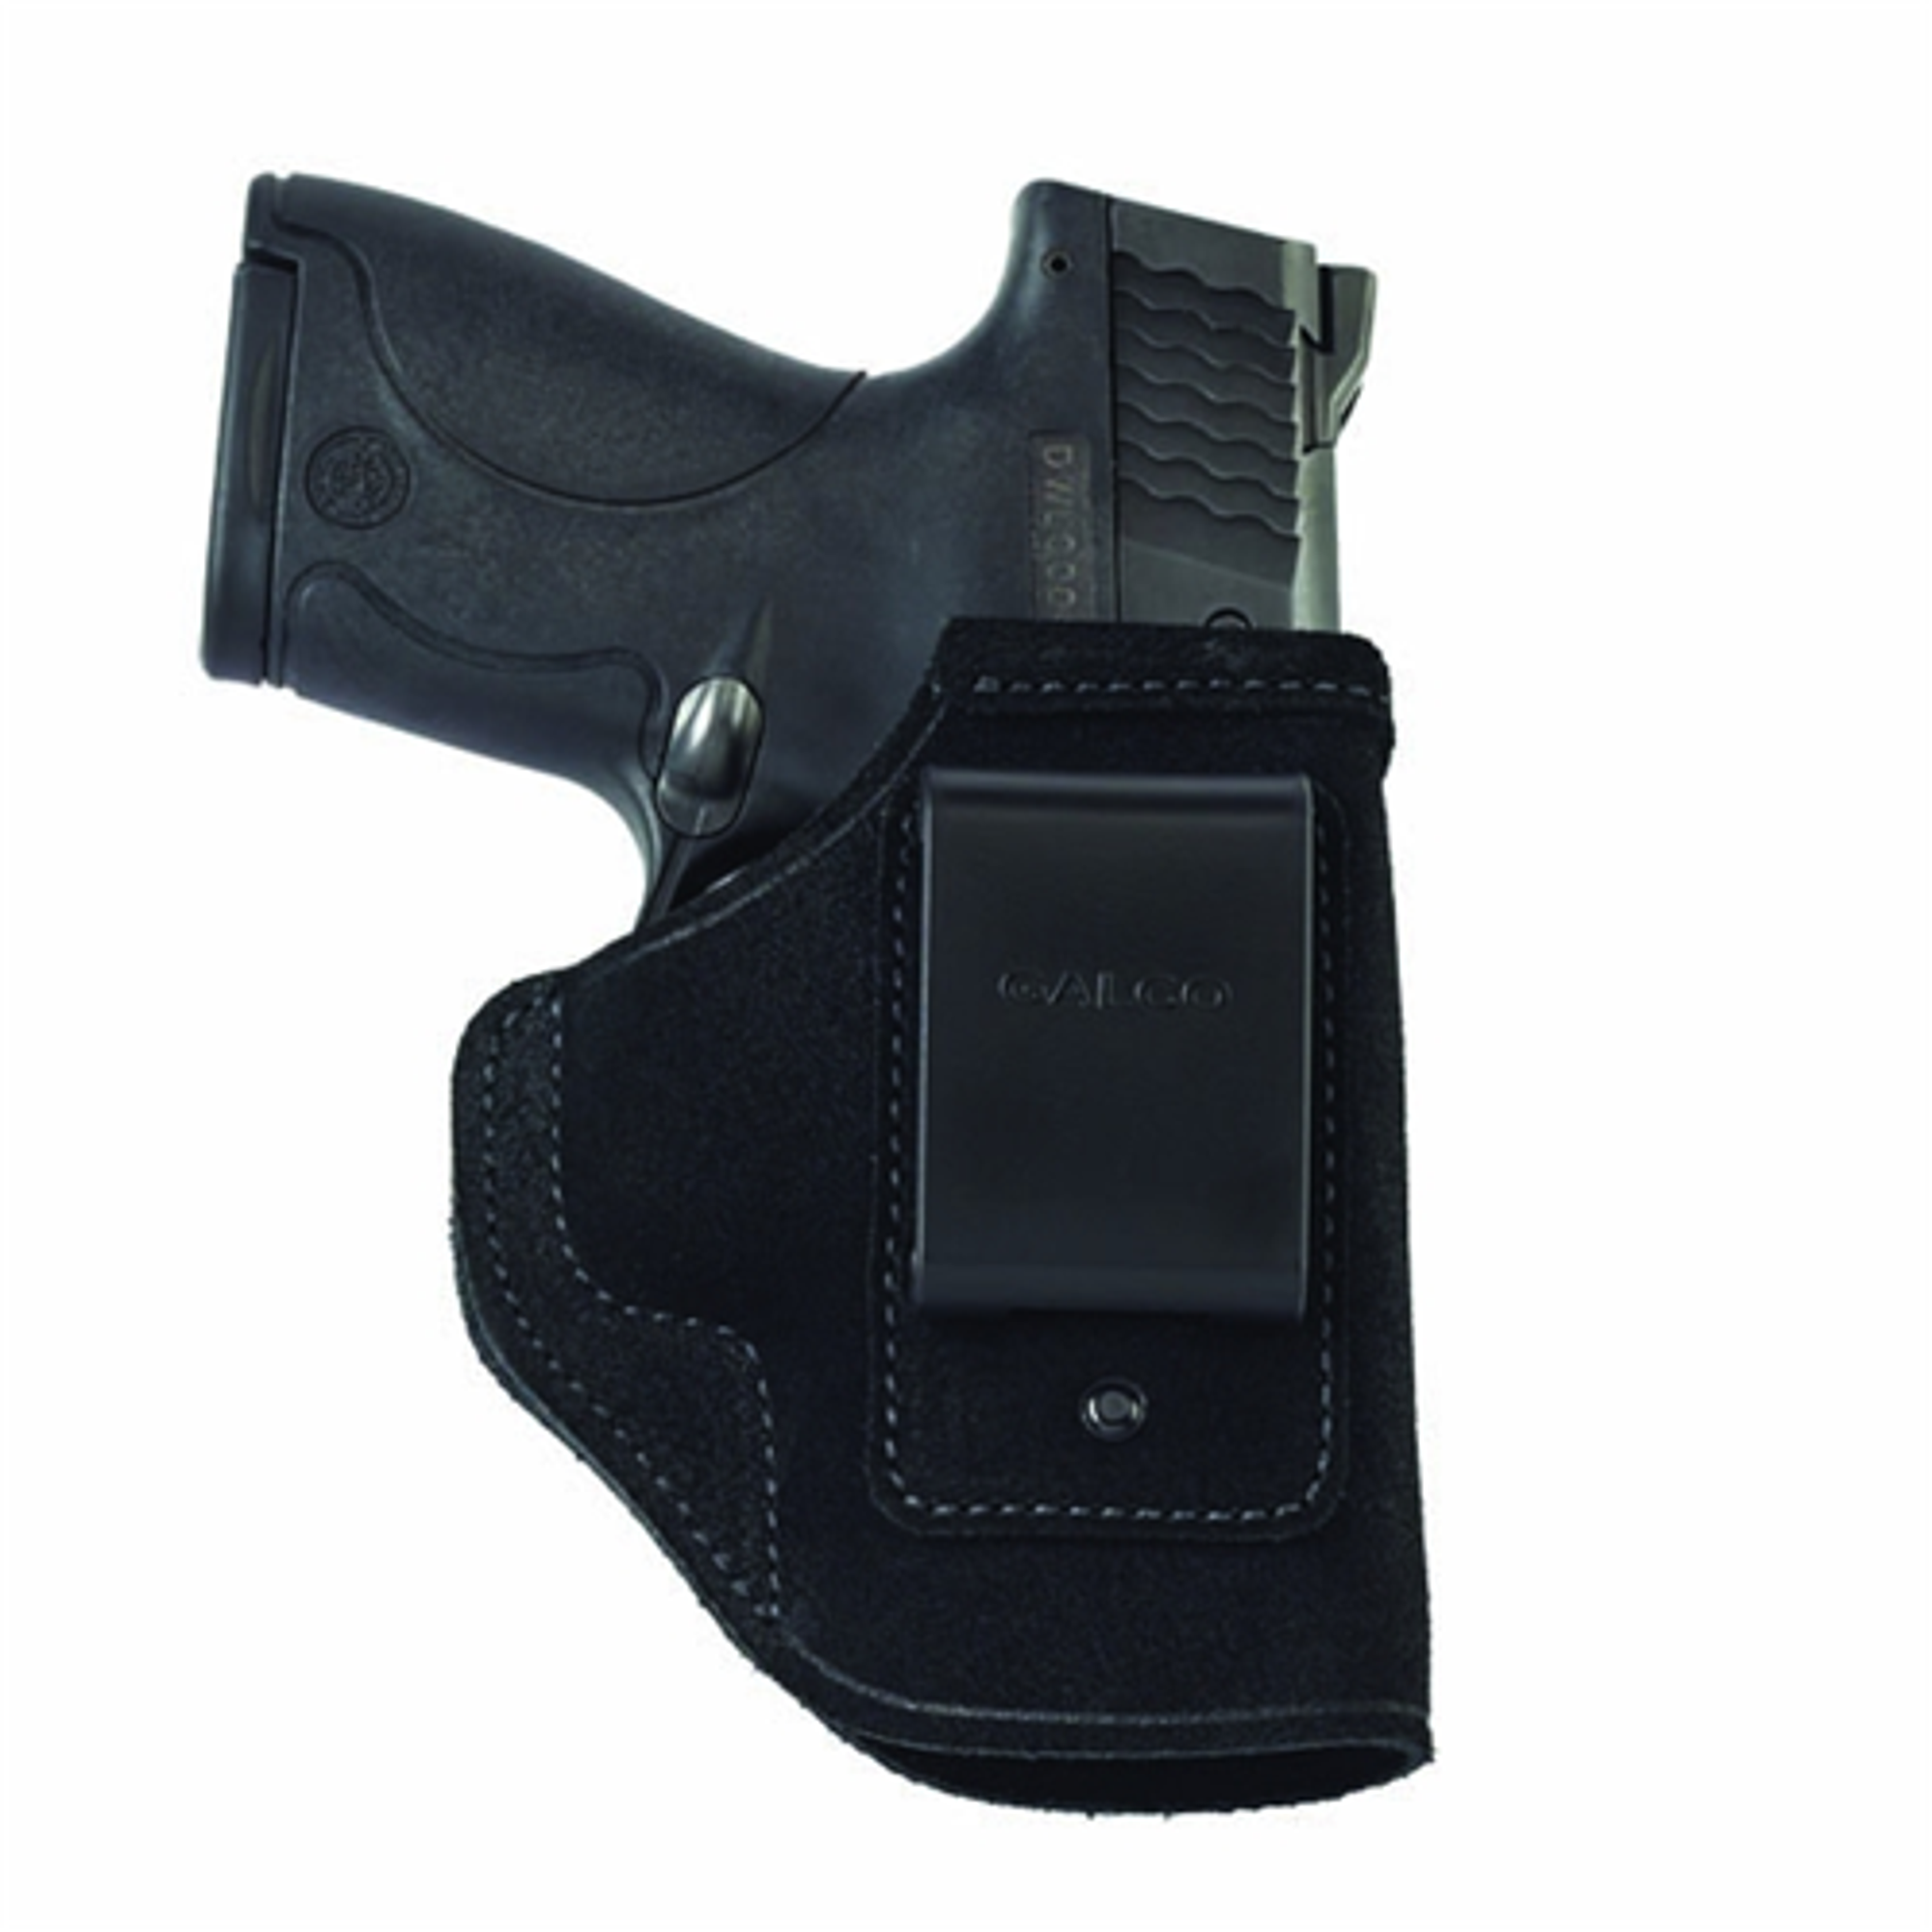 Stow-n-go Inside The Pant Holster - KRGAL-STO440B